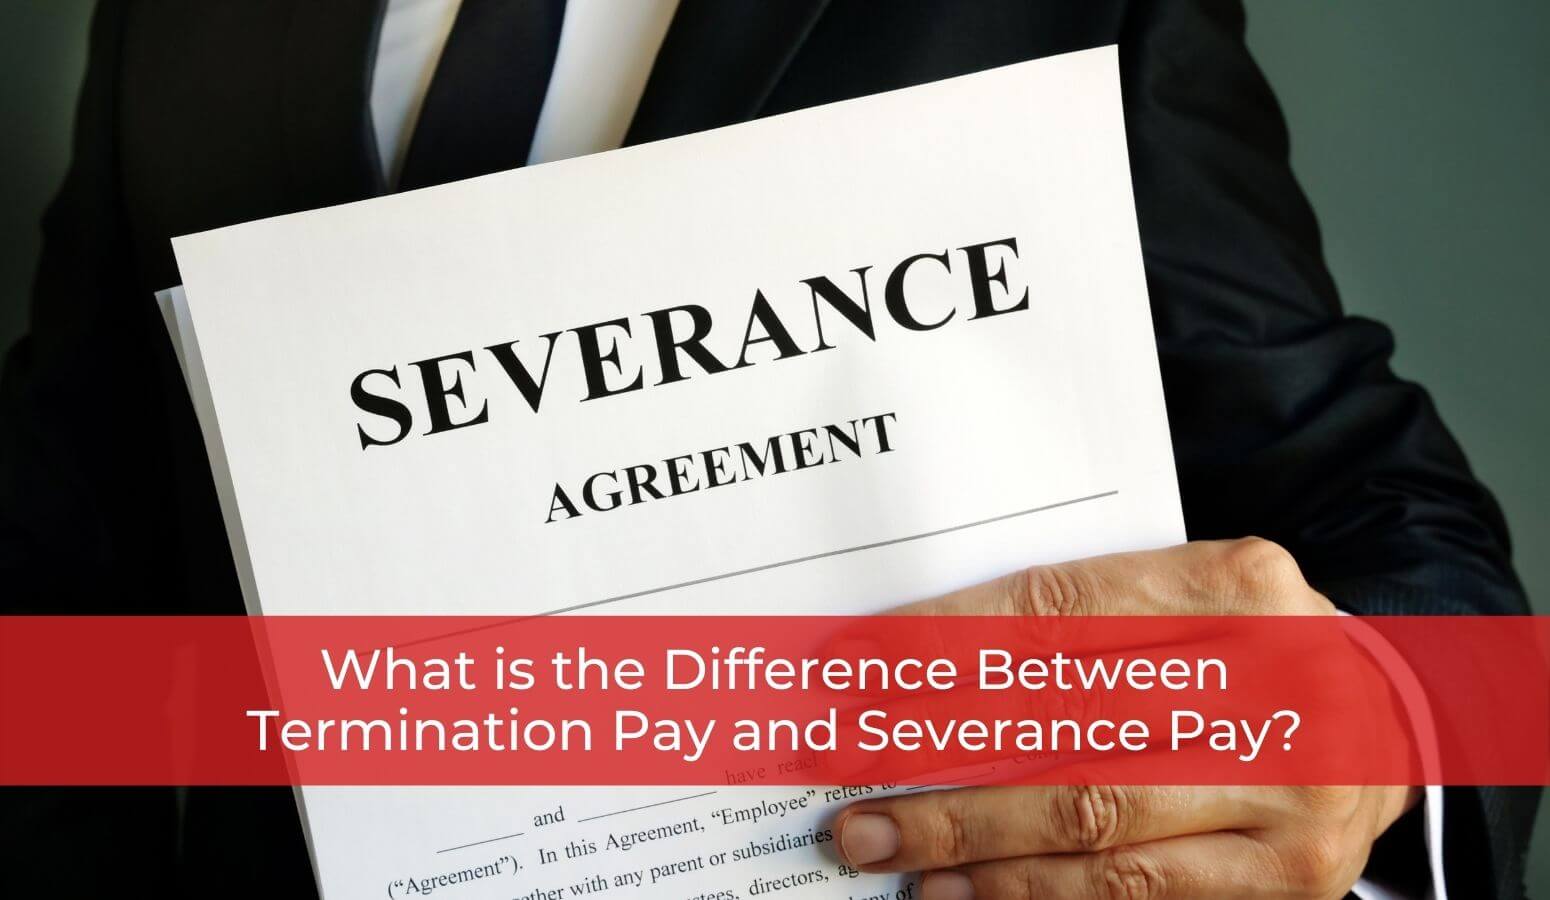 What is the difference between termination pay and severance pay